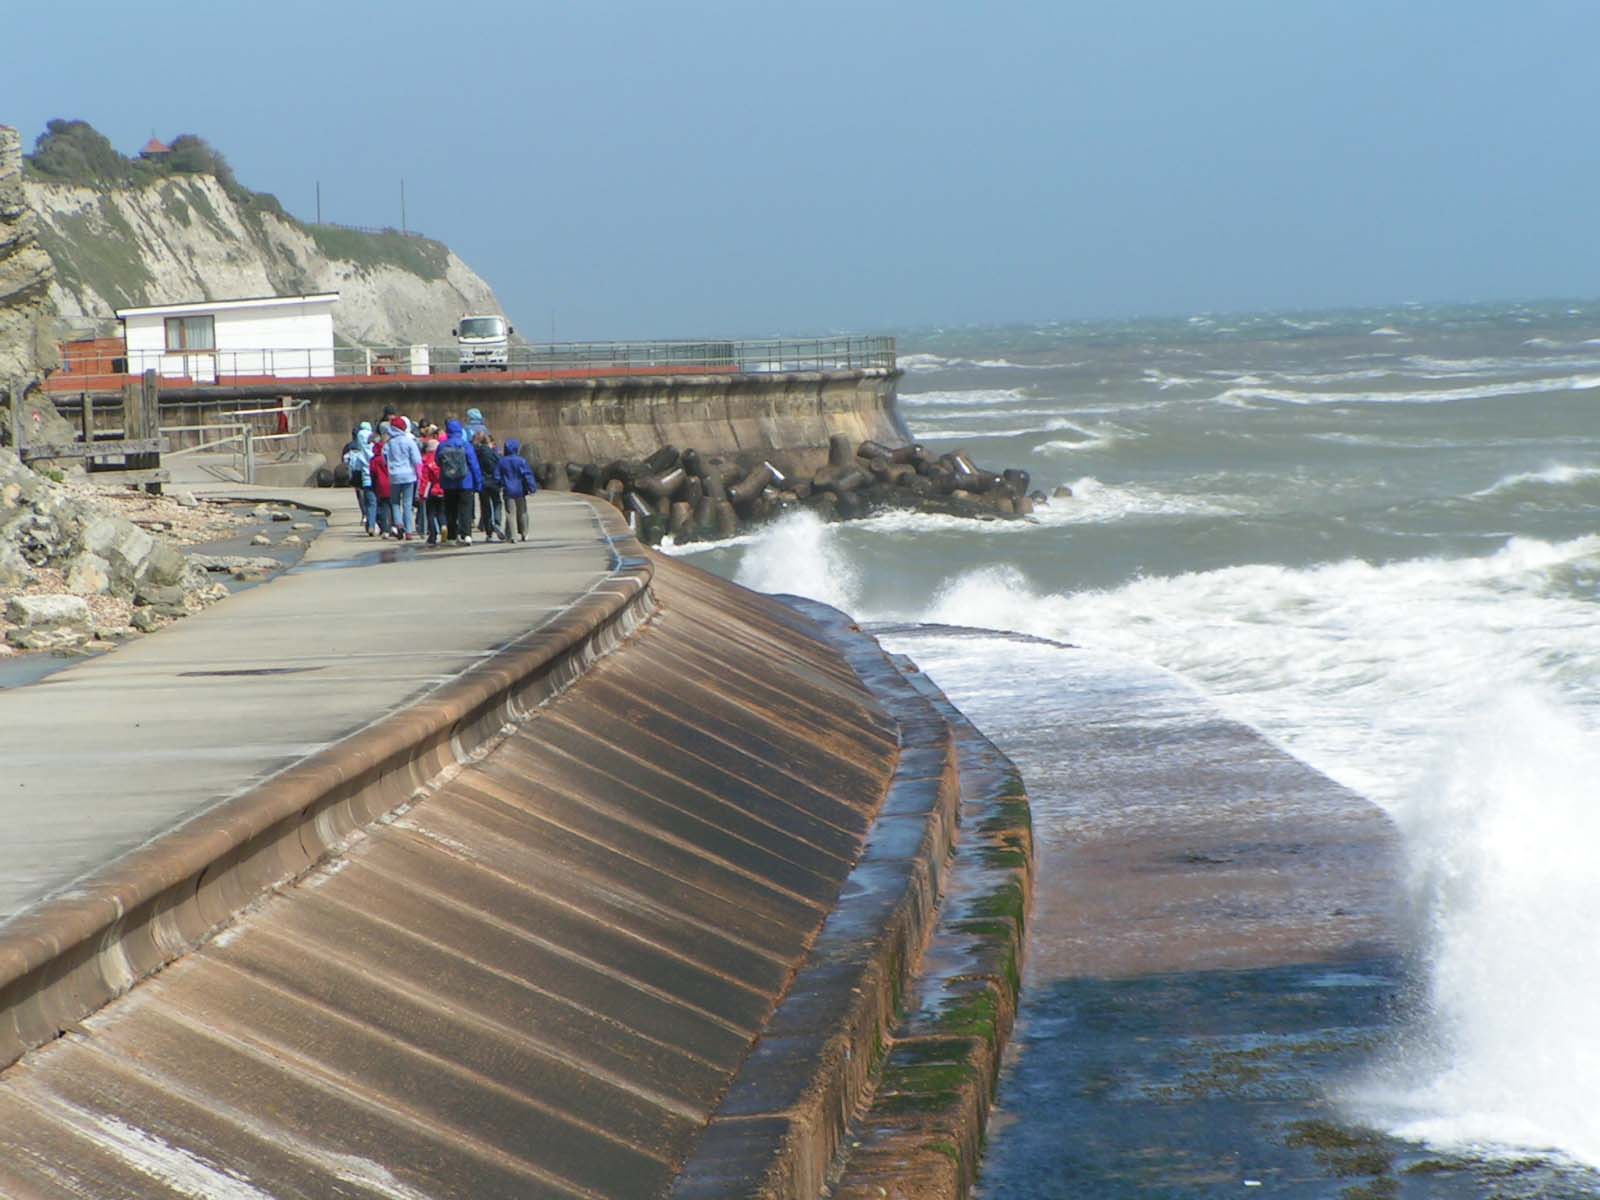 Concrete Seawall keeps the waves at bay